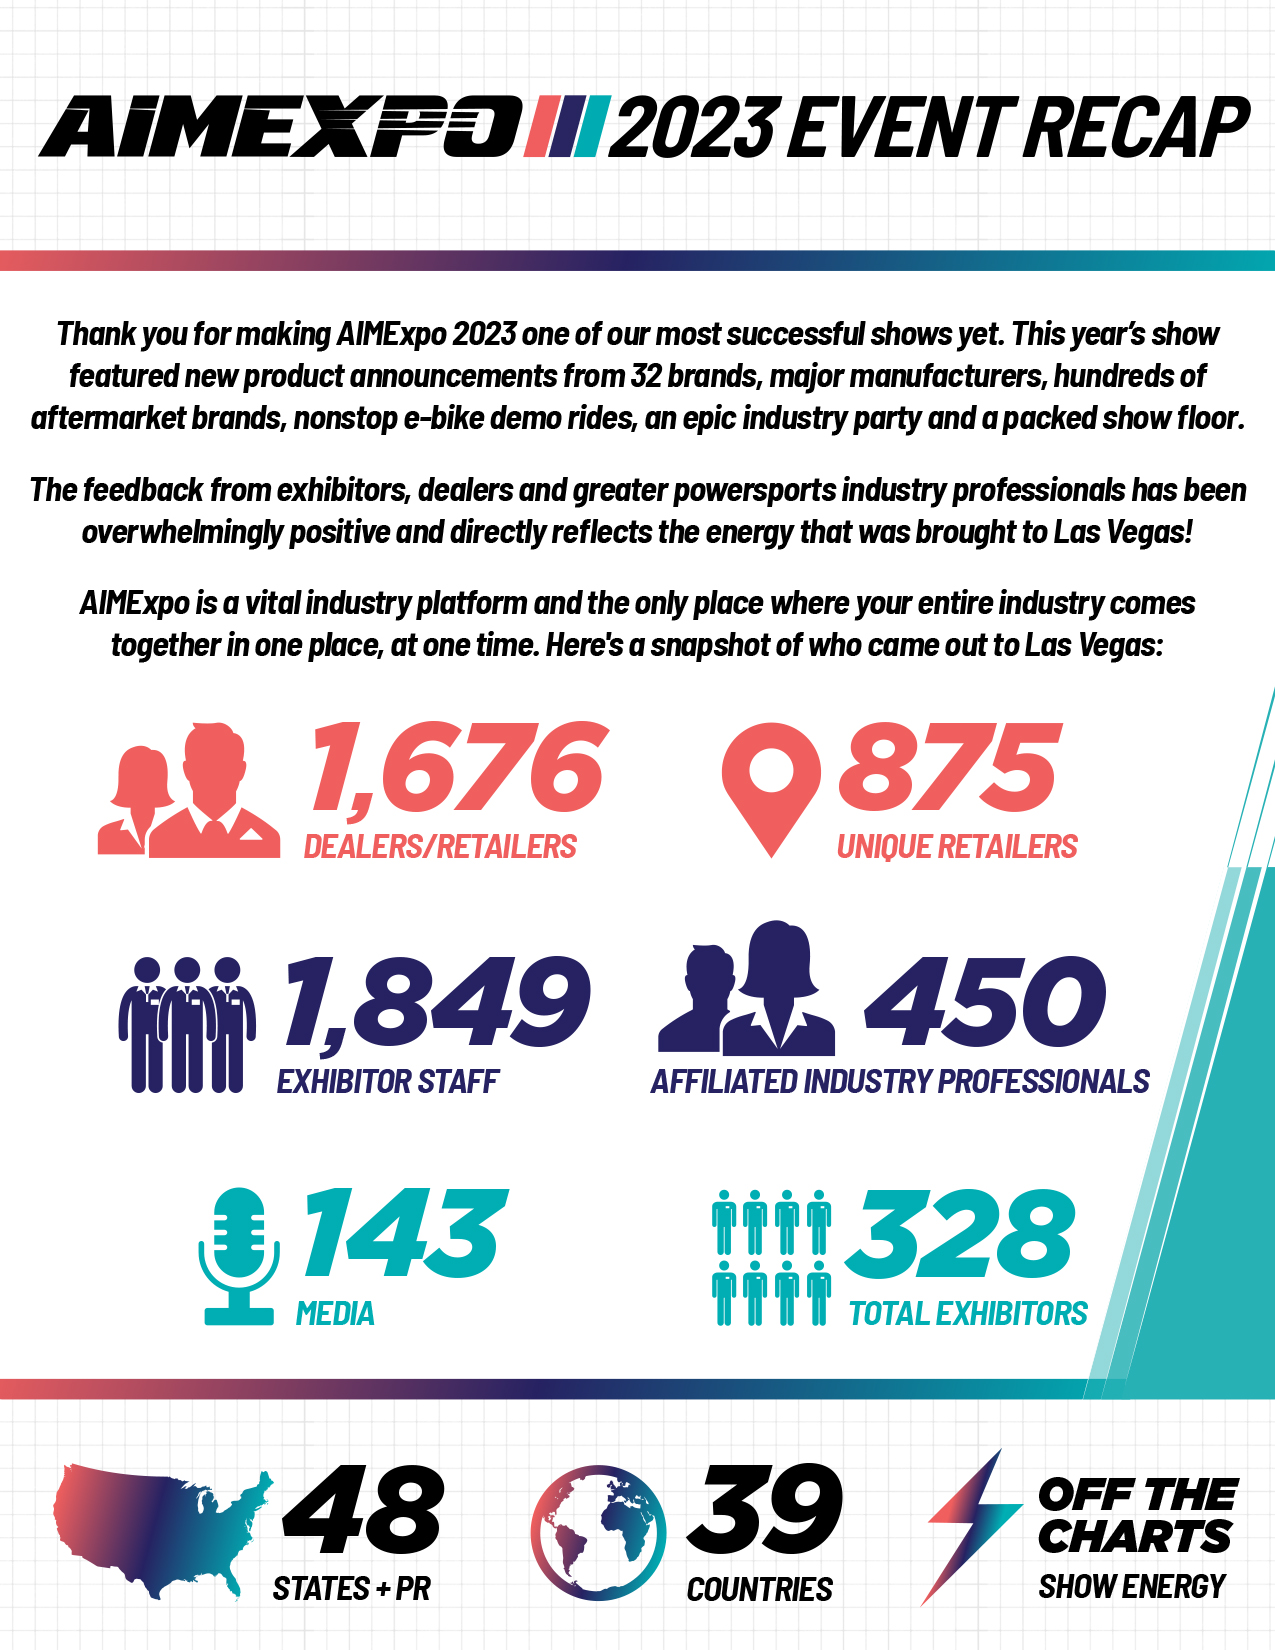 AIMExpo 2023 by the numbers